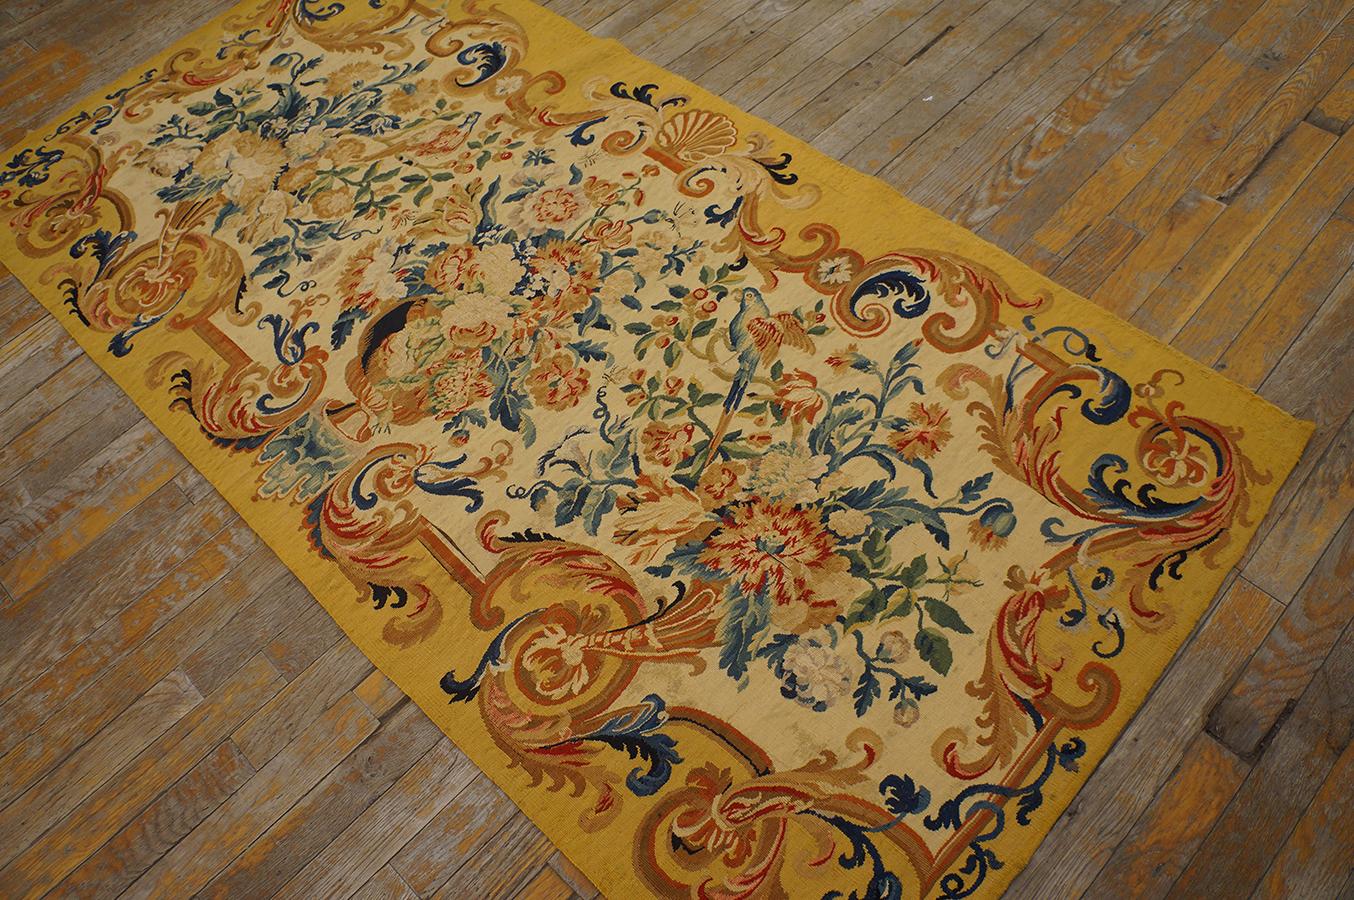 Early 18th Century French Tapestry
3' X 6' - 90 X 185